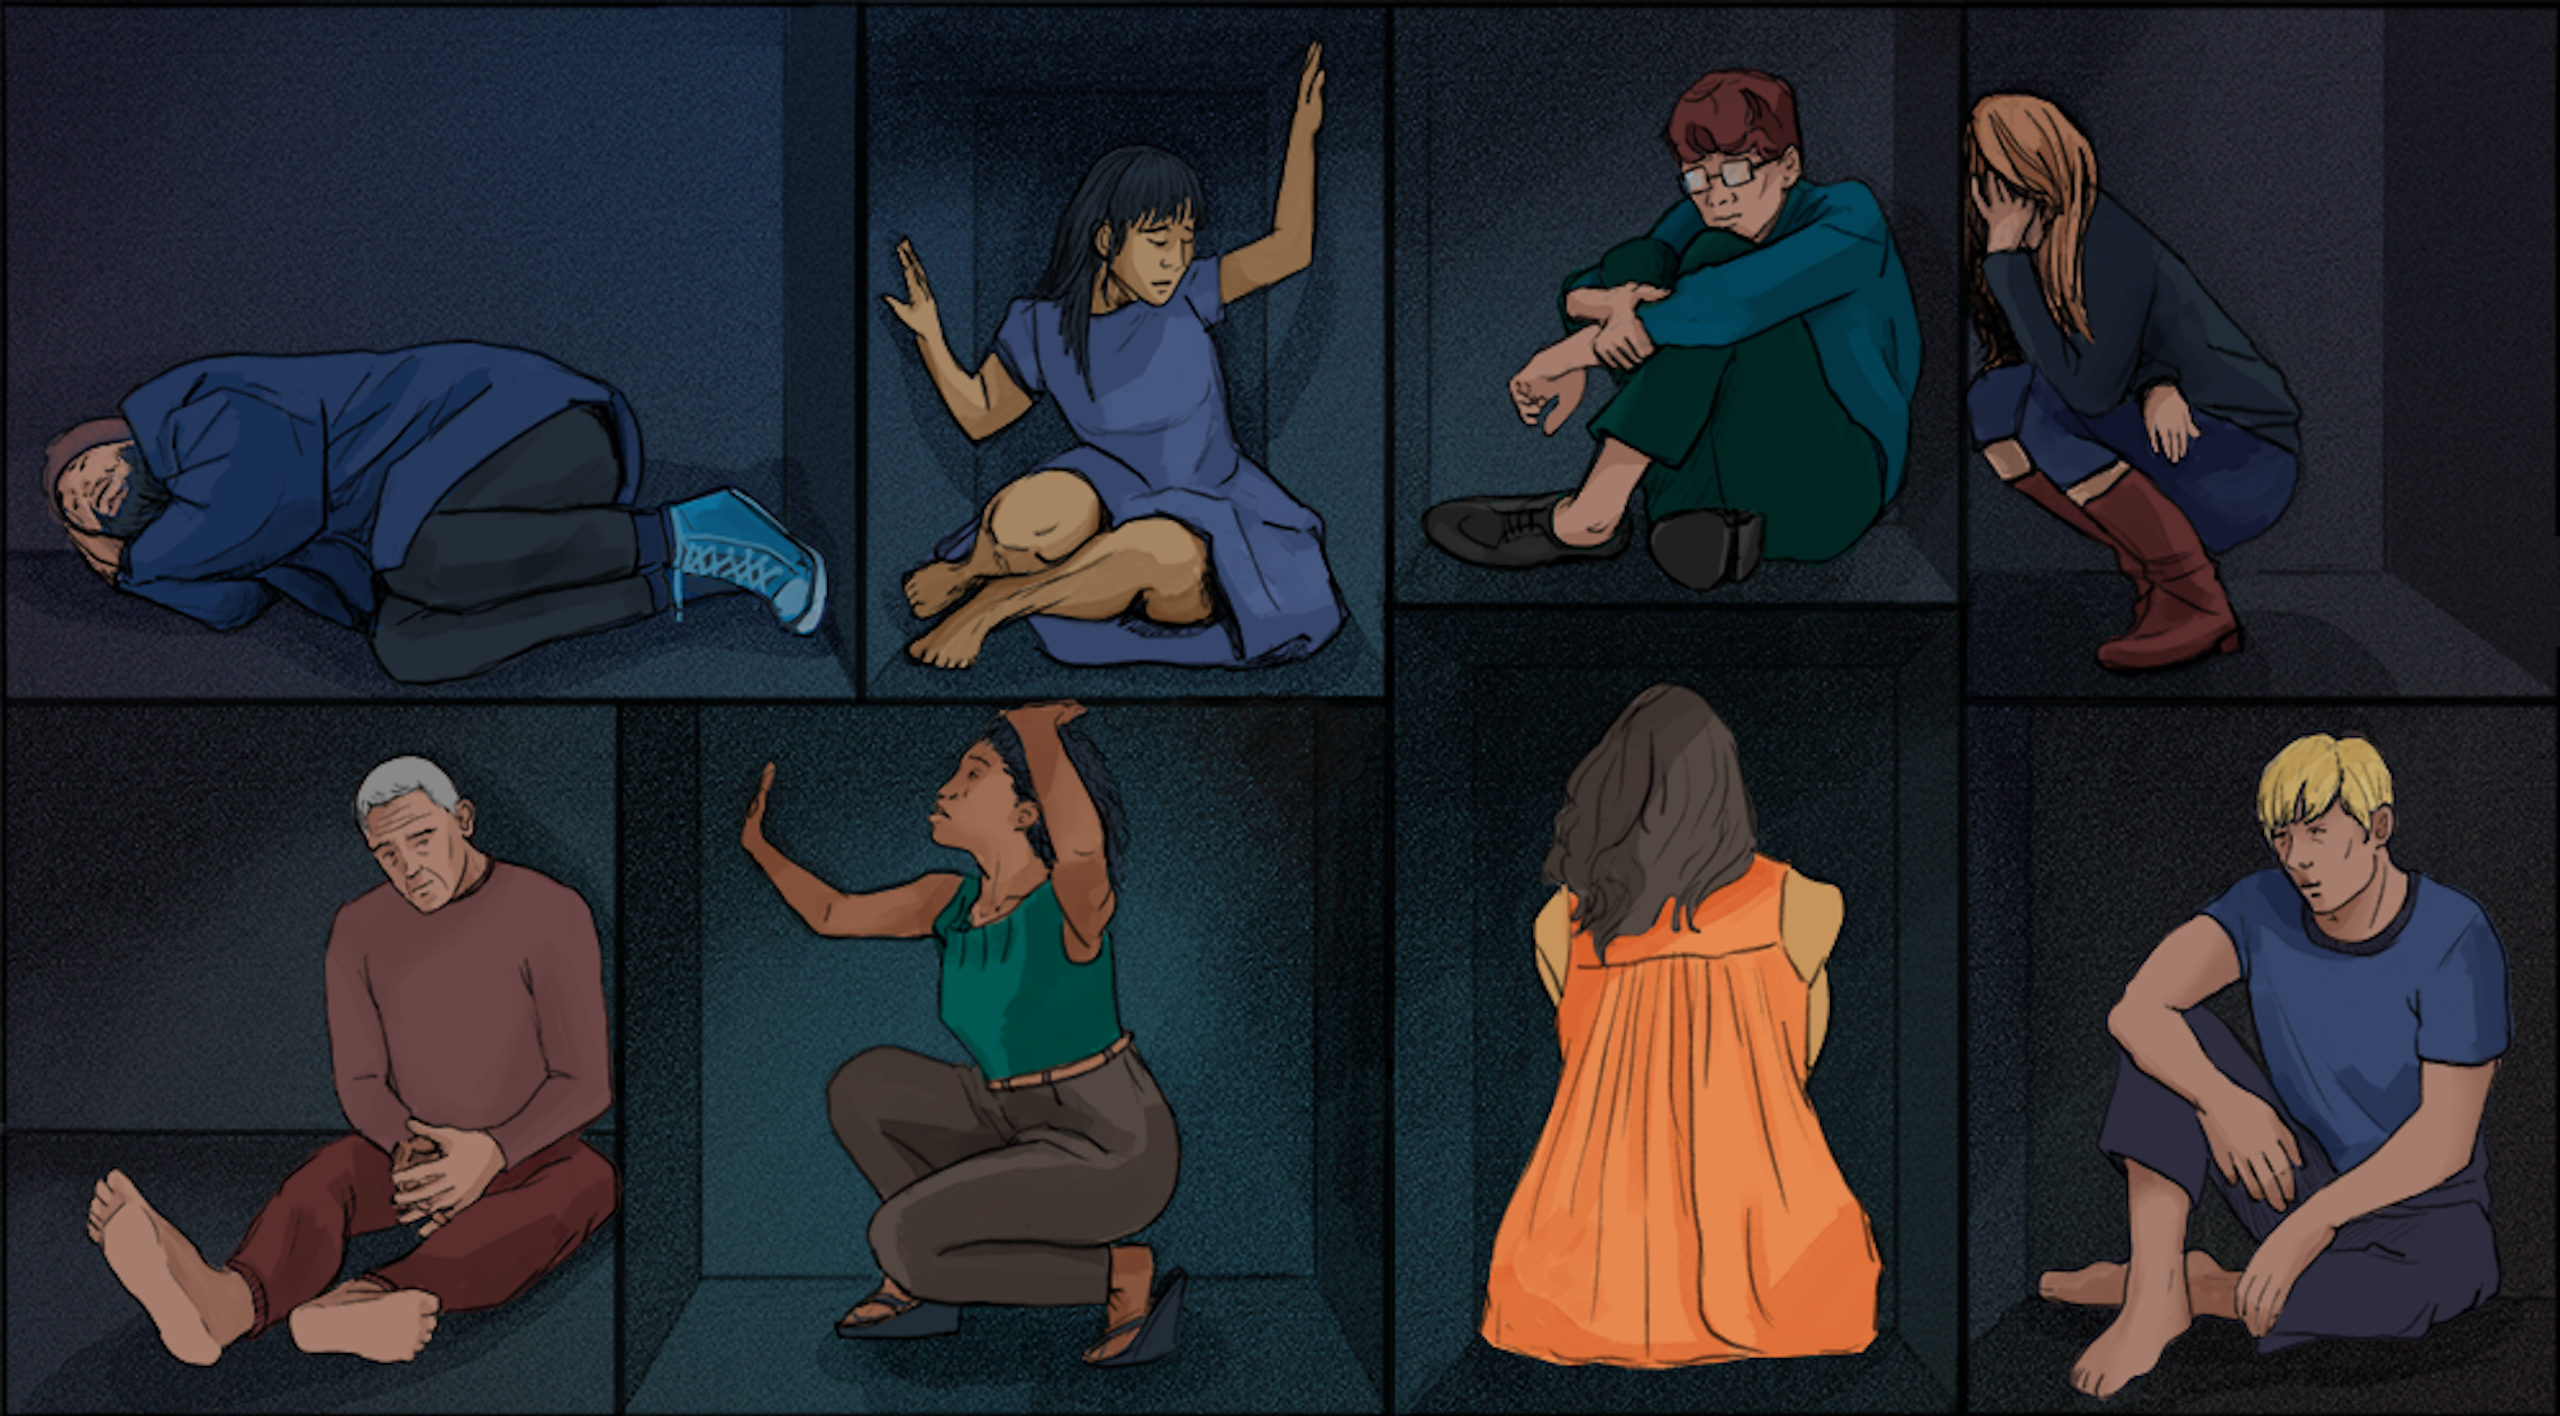 People sit in boxed compartments, some struggling to get out and others staring despondently, illustration by Charity Atakunda